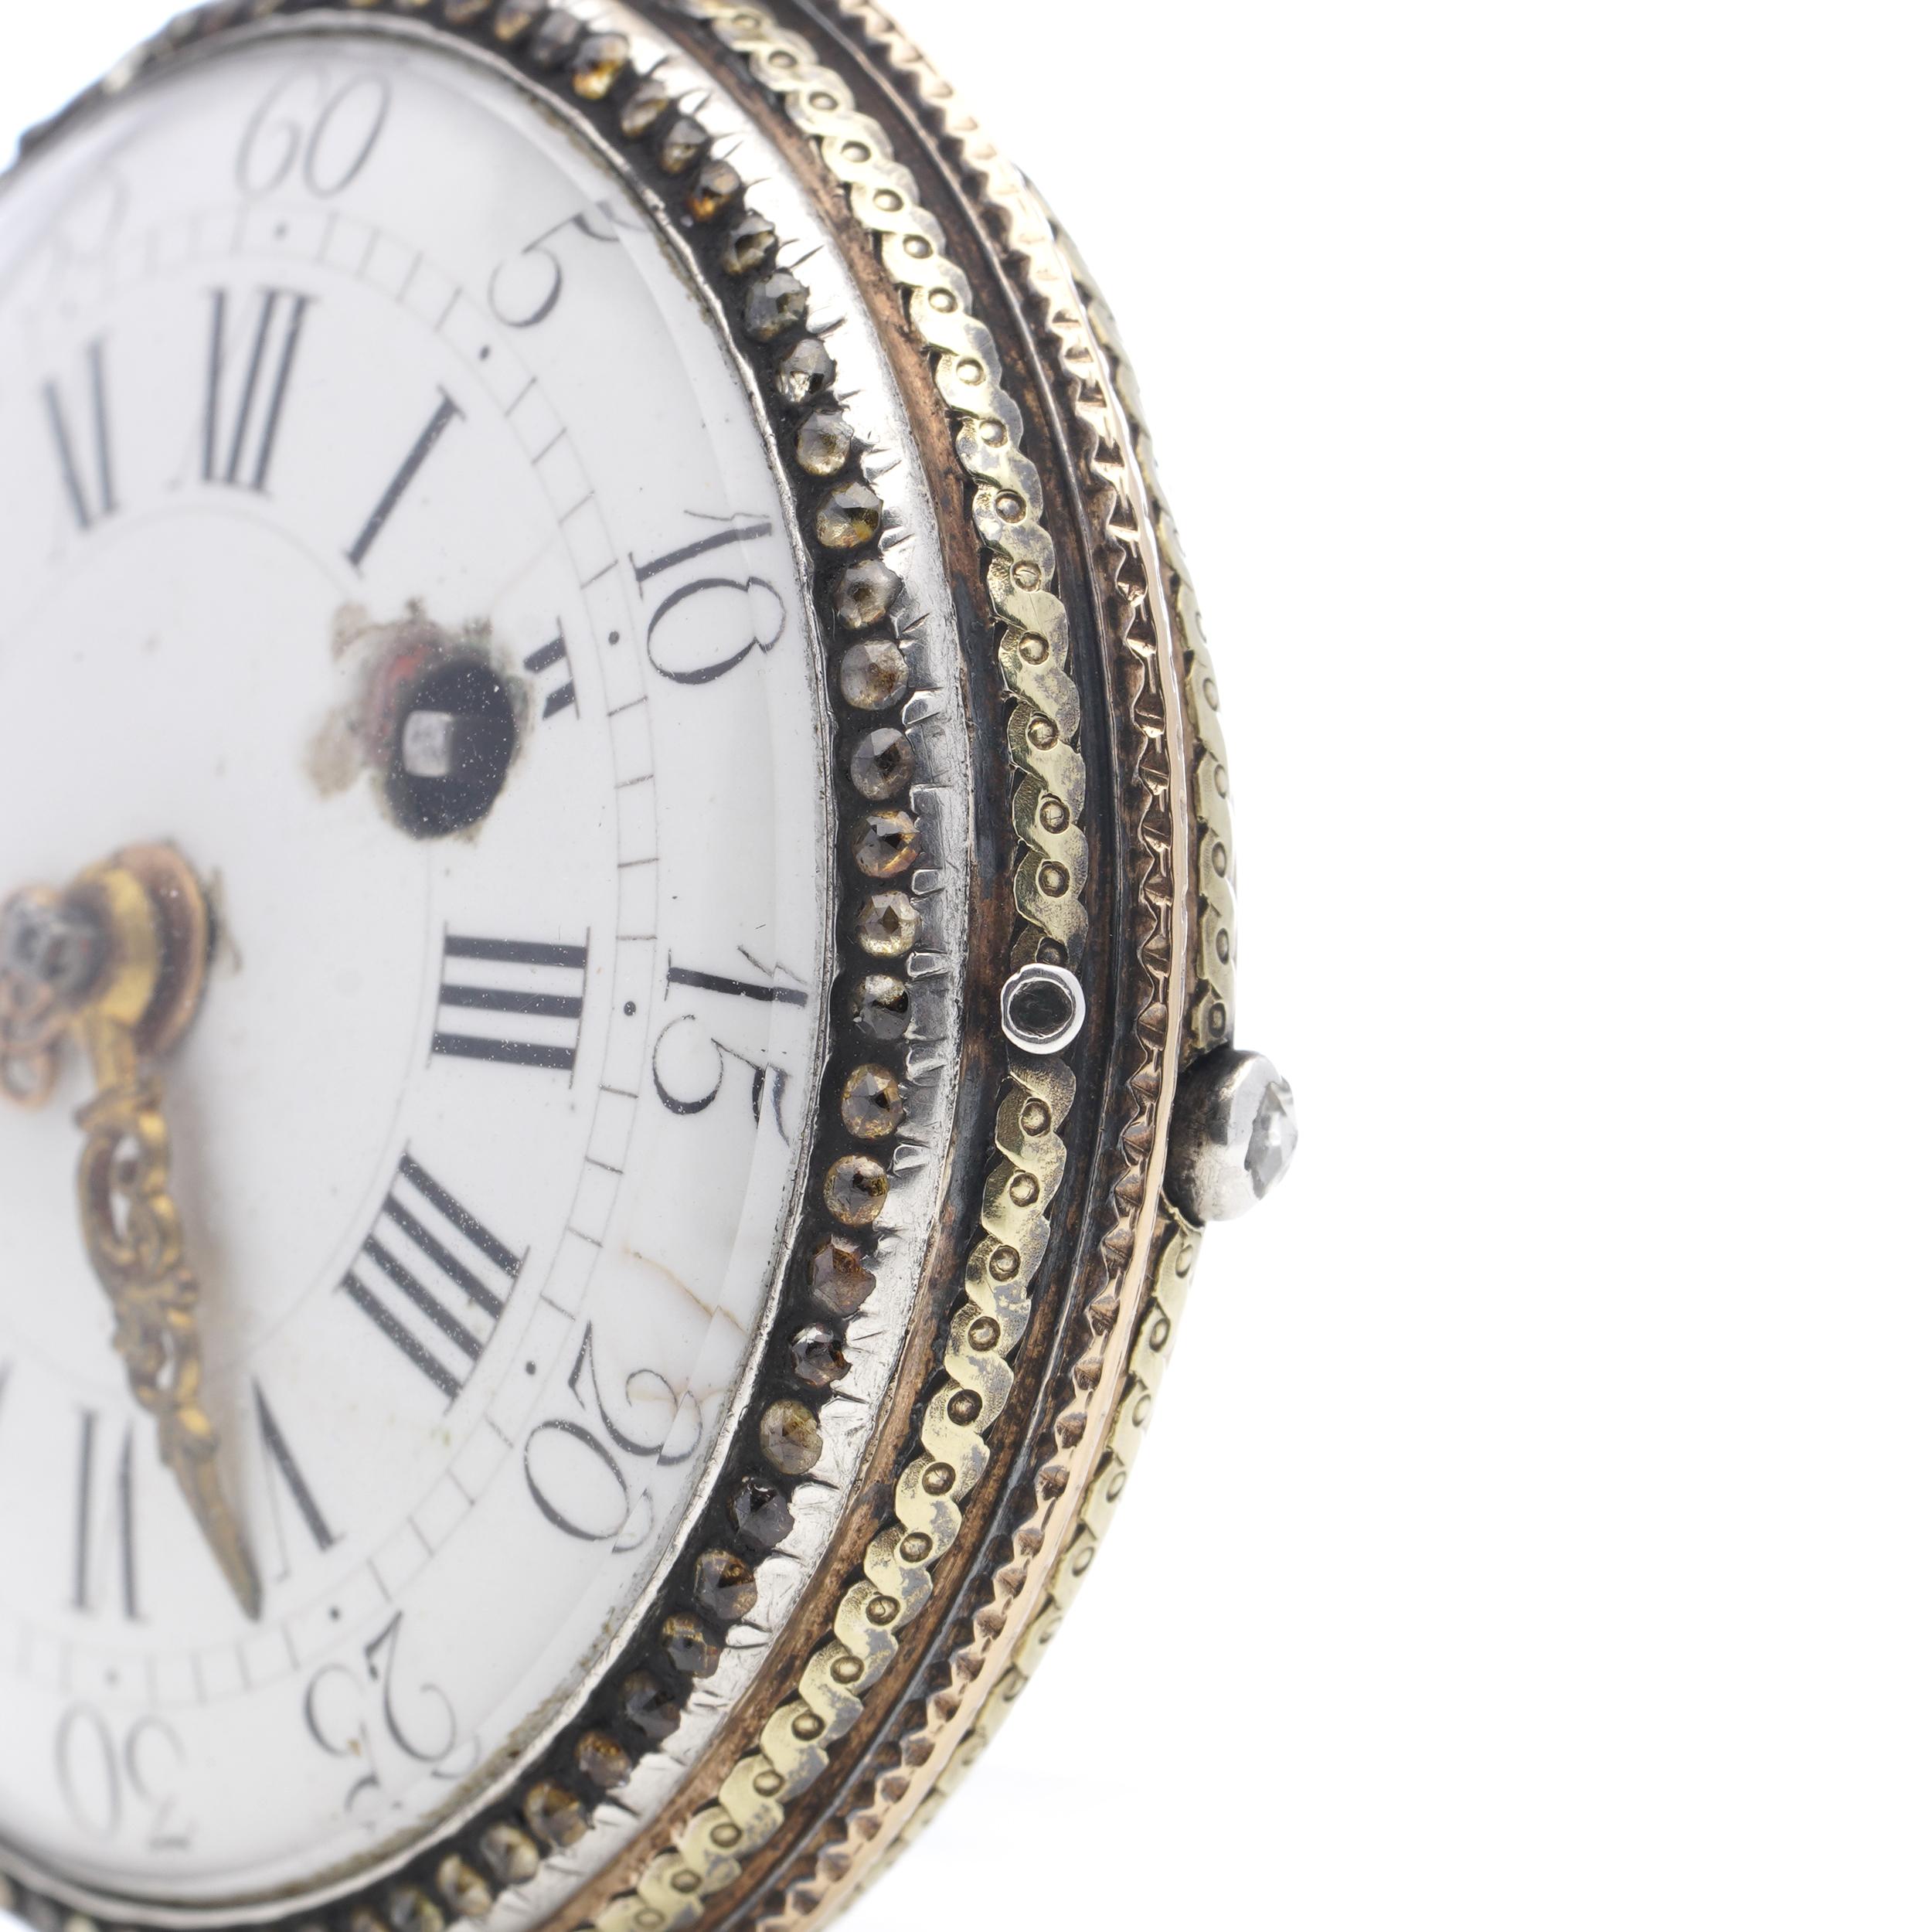 Antique 18th Century Verge Fusee Key Wind 18kt Gold and Silver Pocket Watch In Good Condition For Sale In Braintree, GB